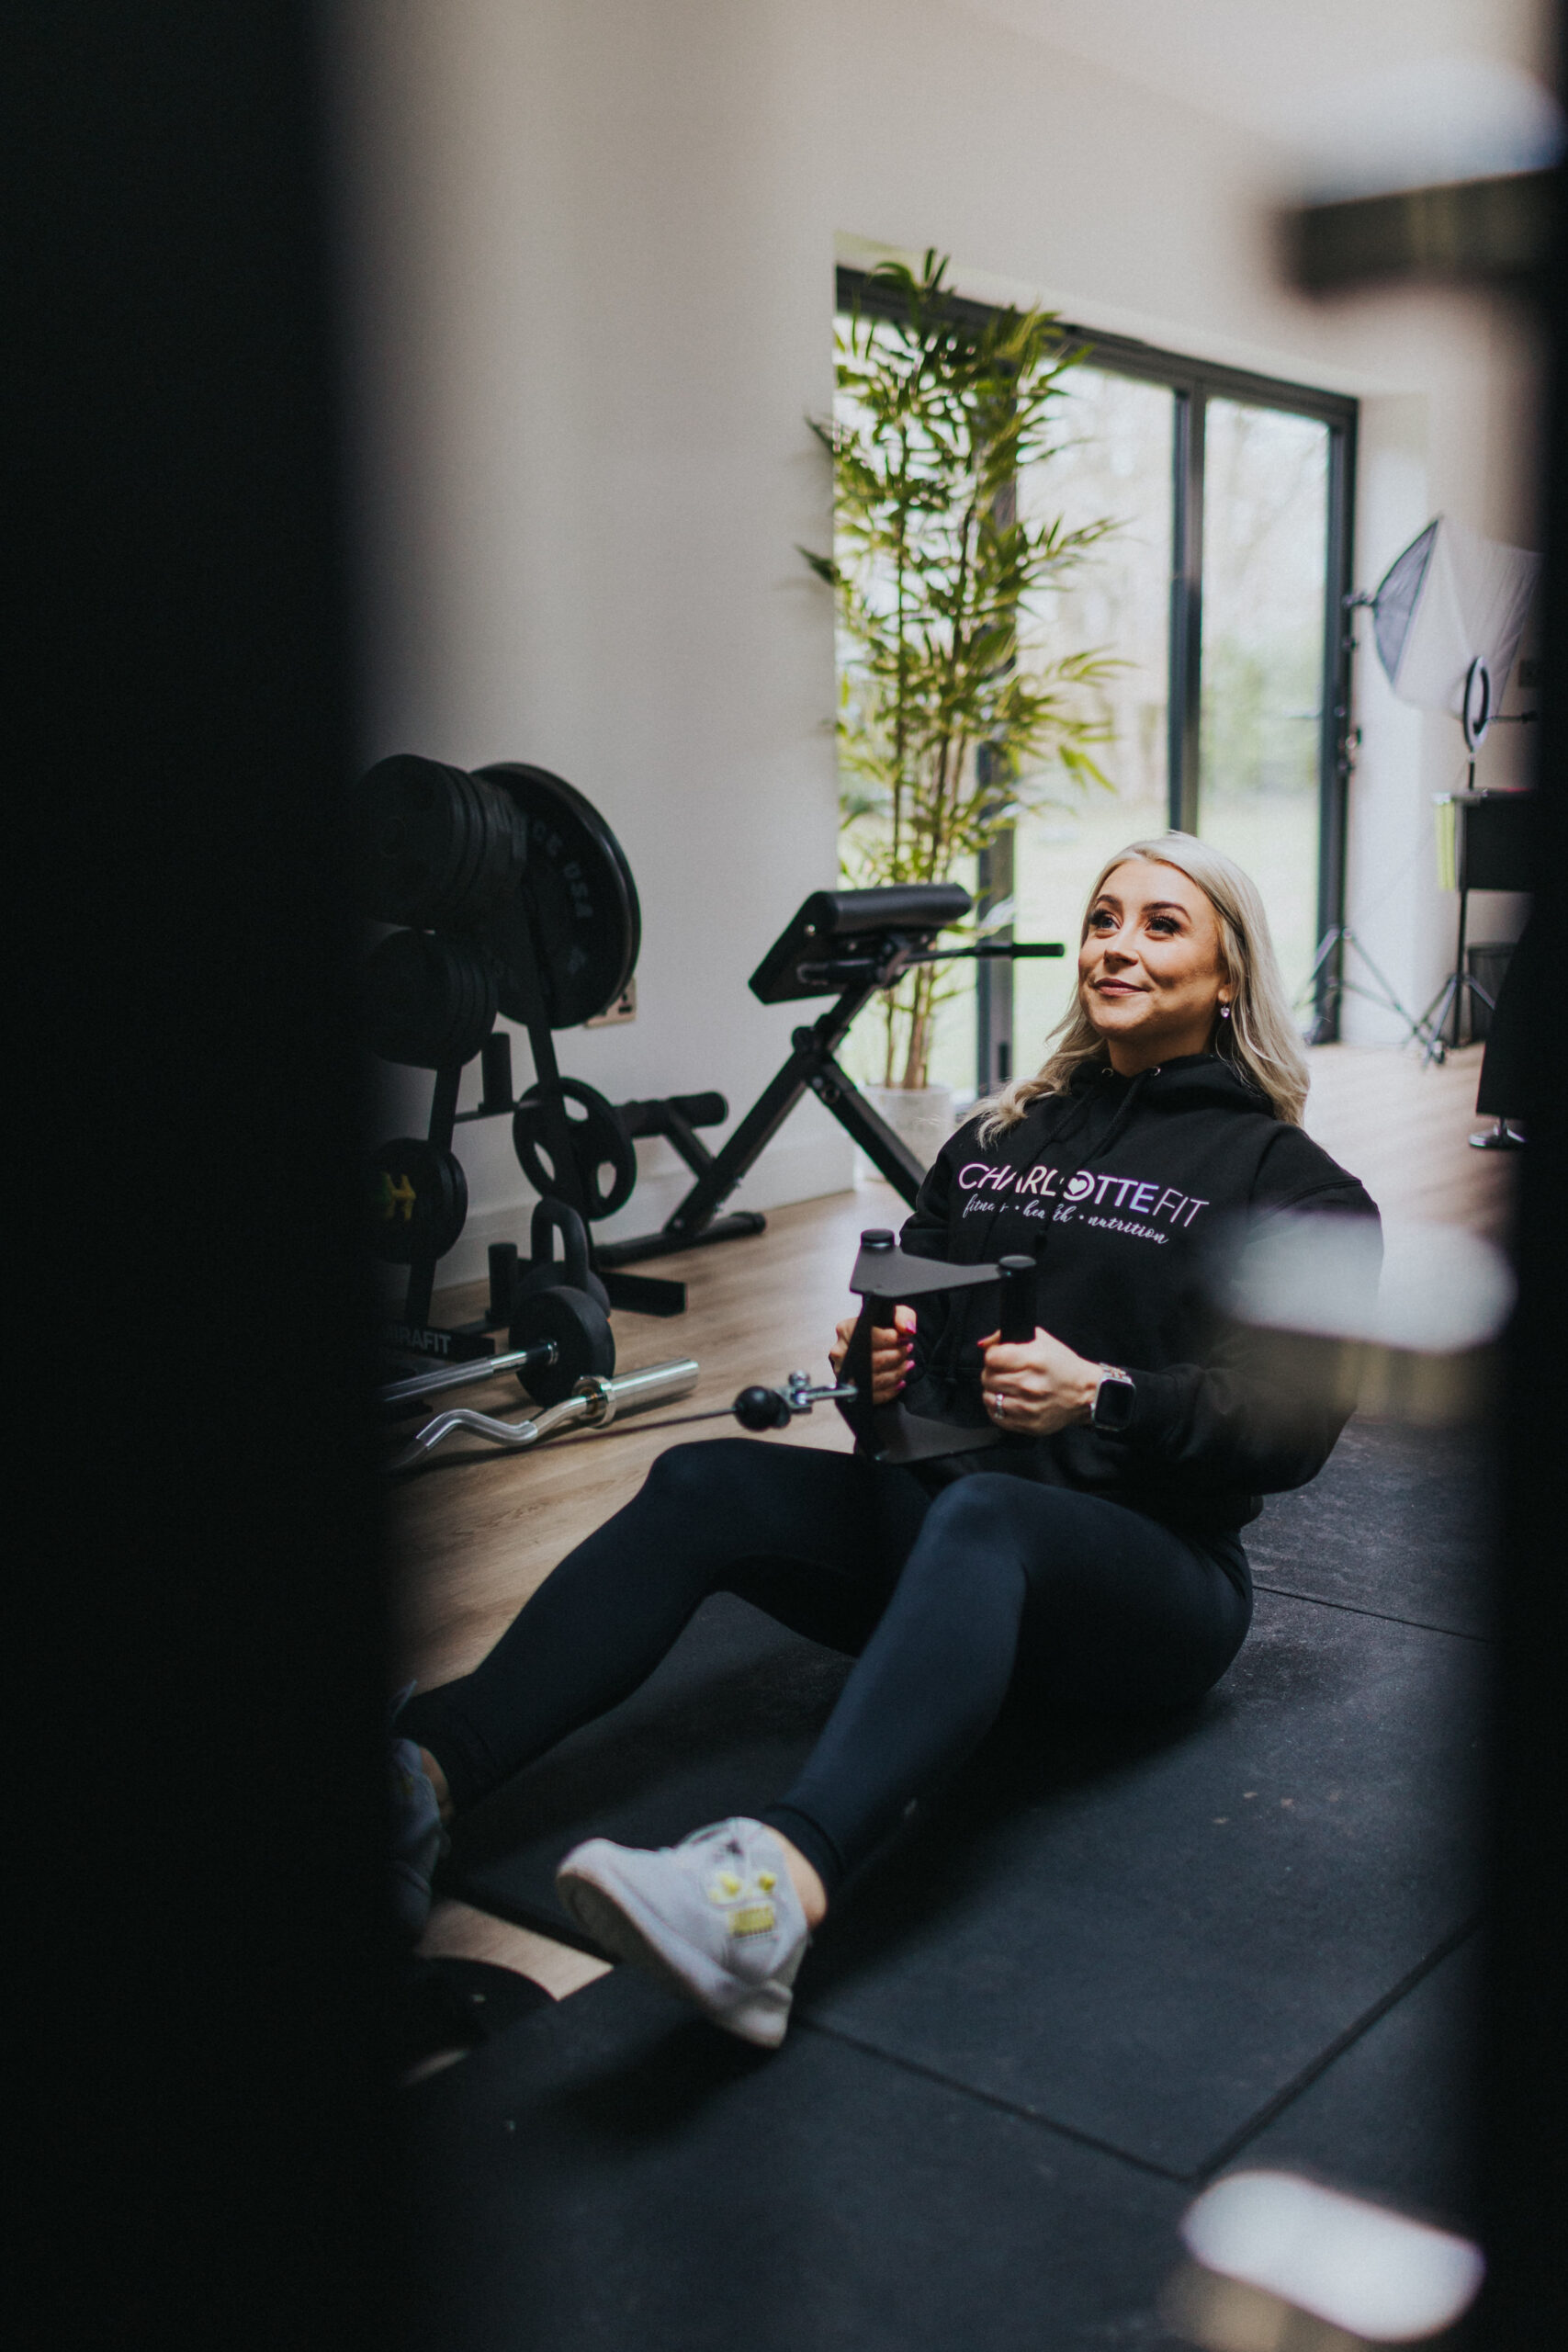 Capturing CharlotteFit's essence in branding images